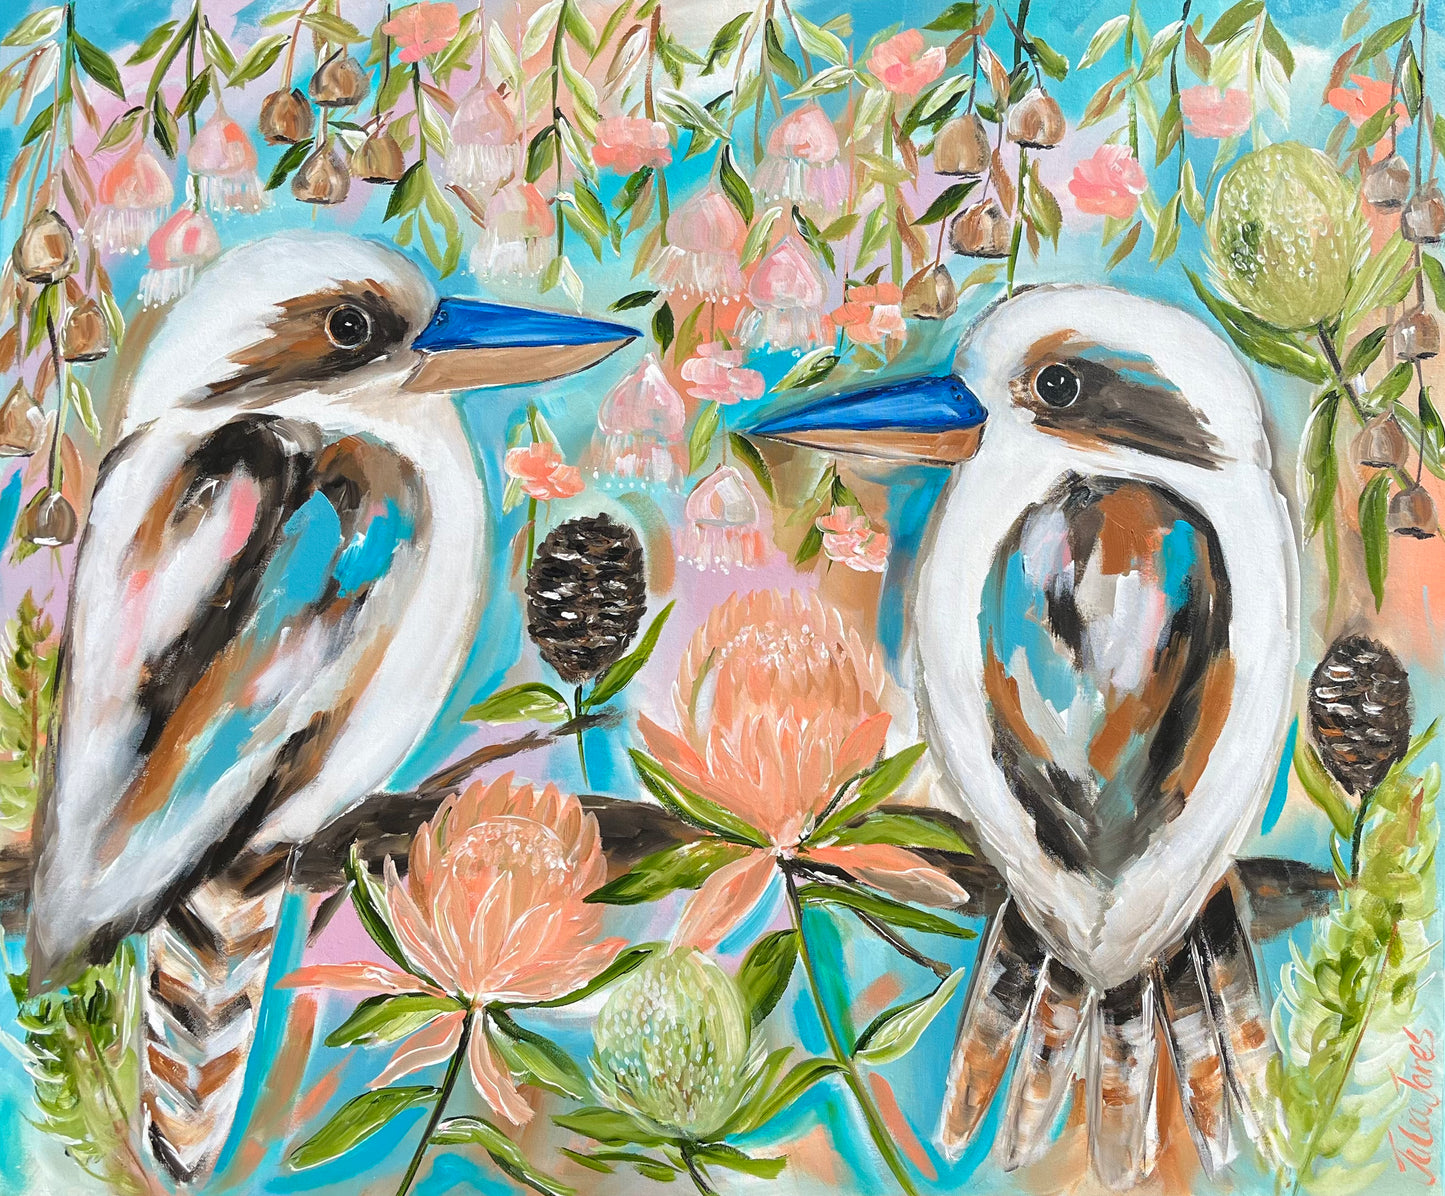 Kookaburra Bliss - 1.1x1 - Original Artwork - Available by commission